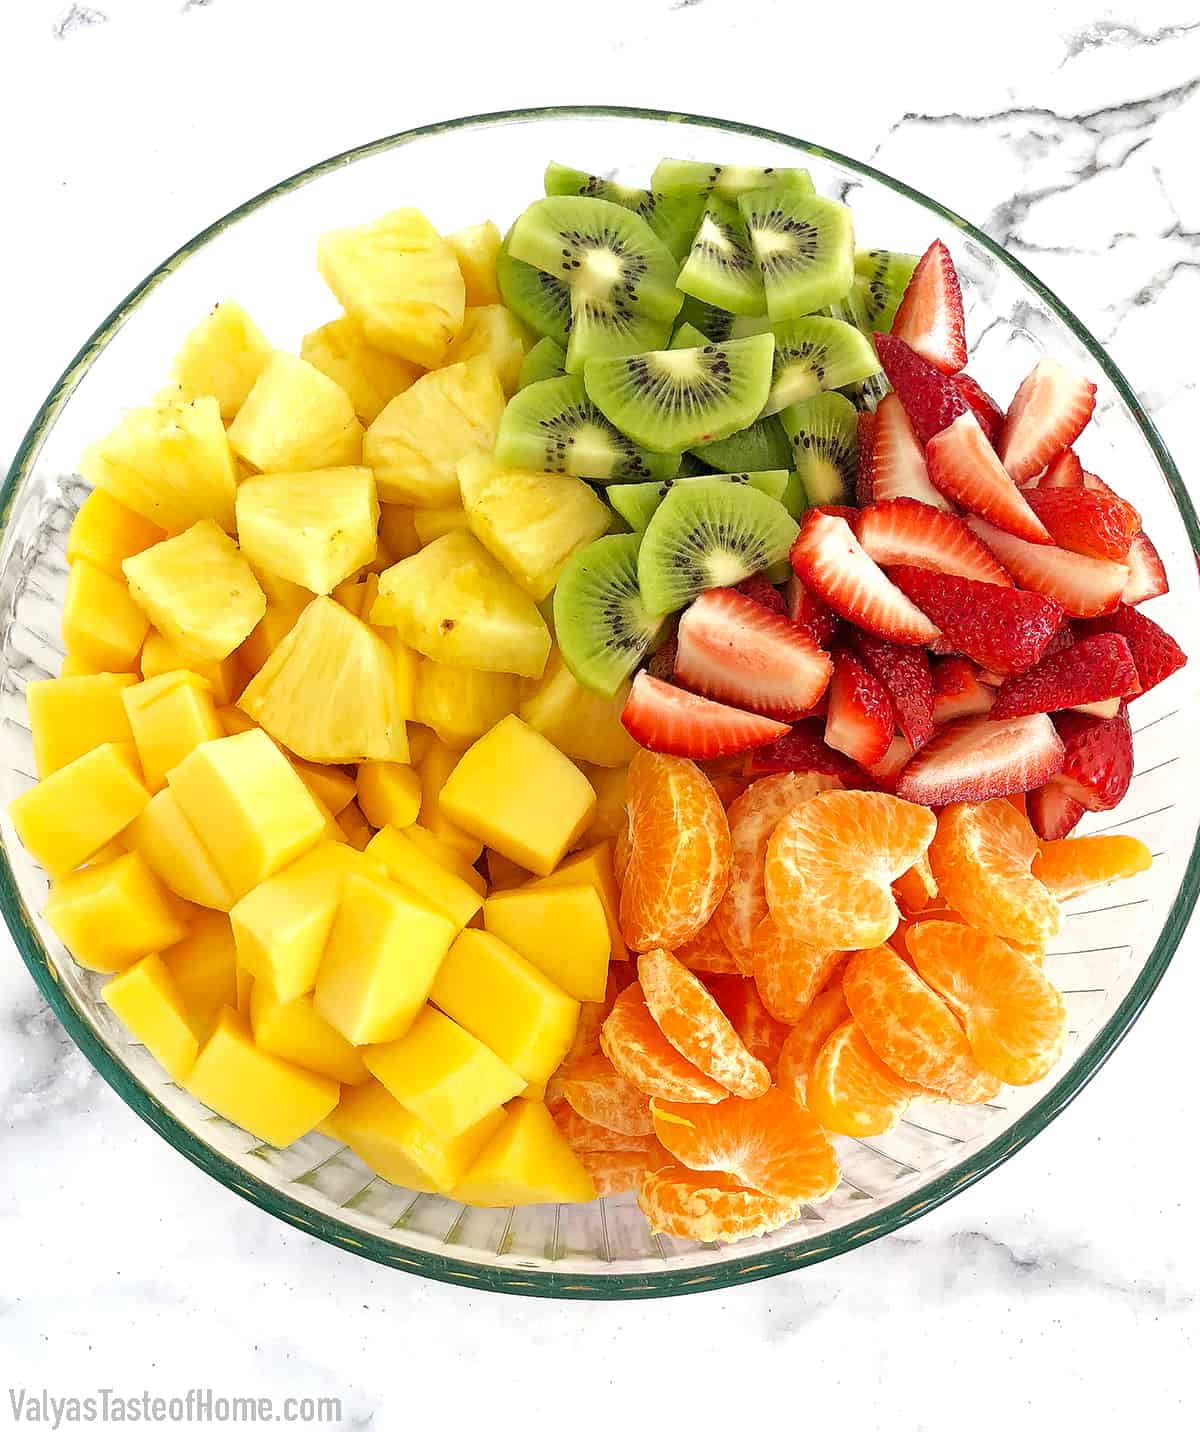 Rinse, pat dry, peel, and cut/slice all the fruits. Place them into a large bowl.